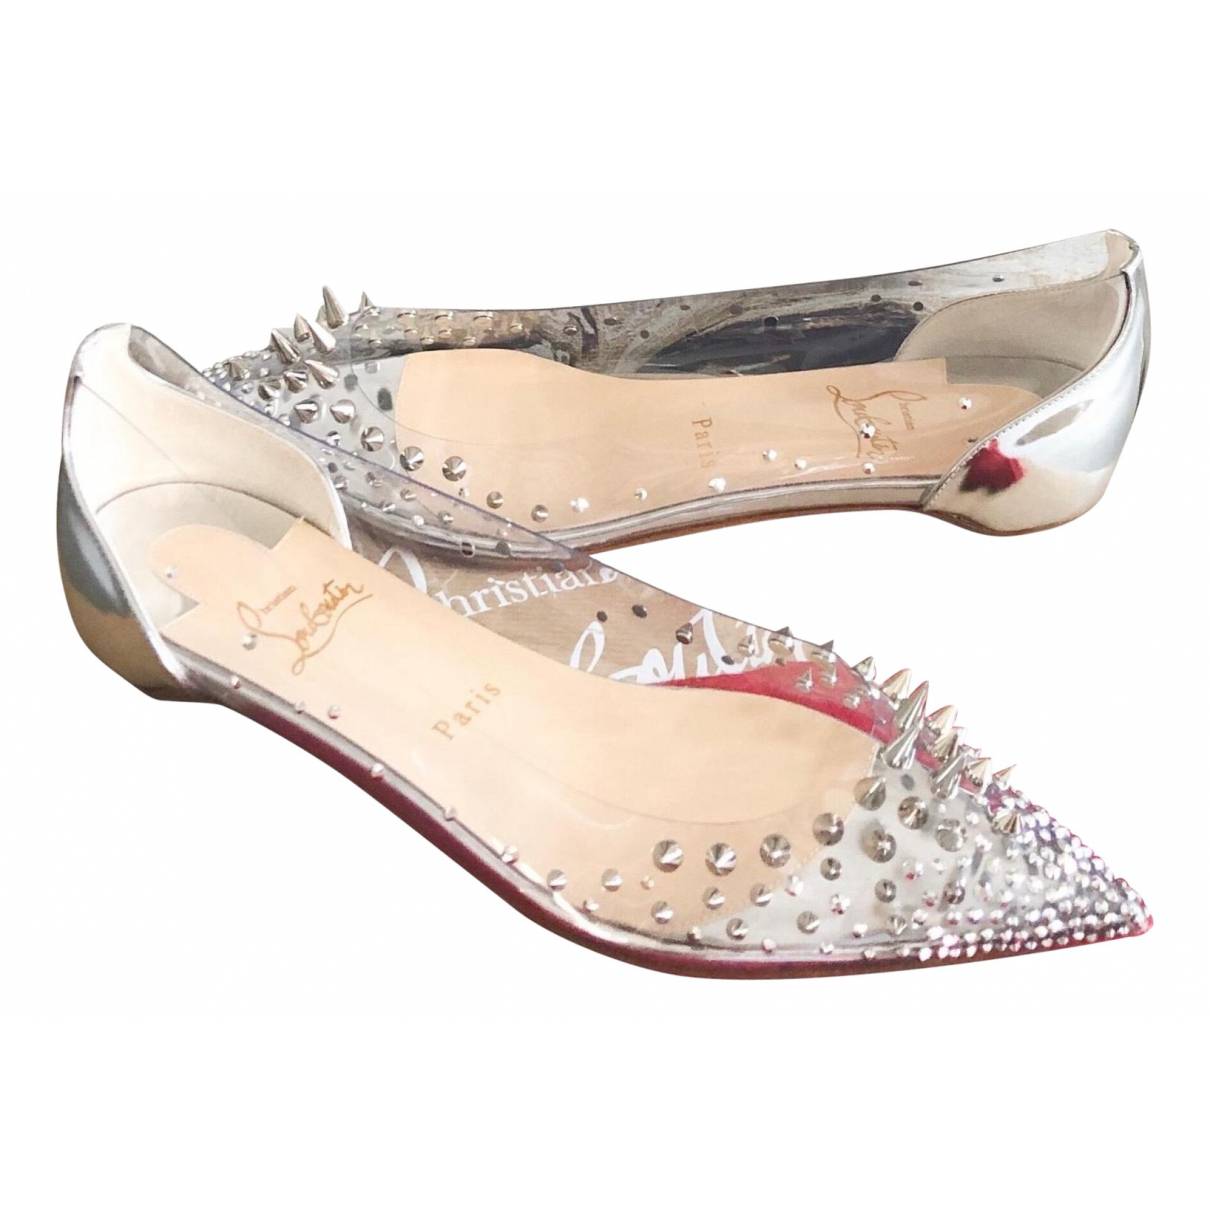 Ballet flats Christian Louboutin size 9 US in -